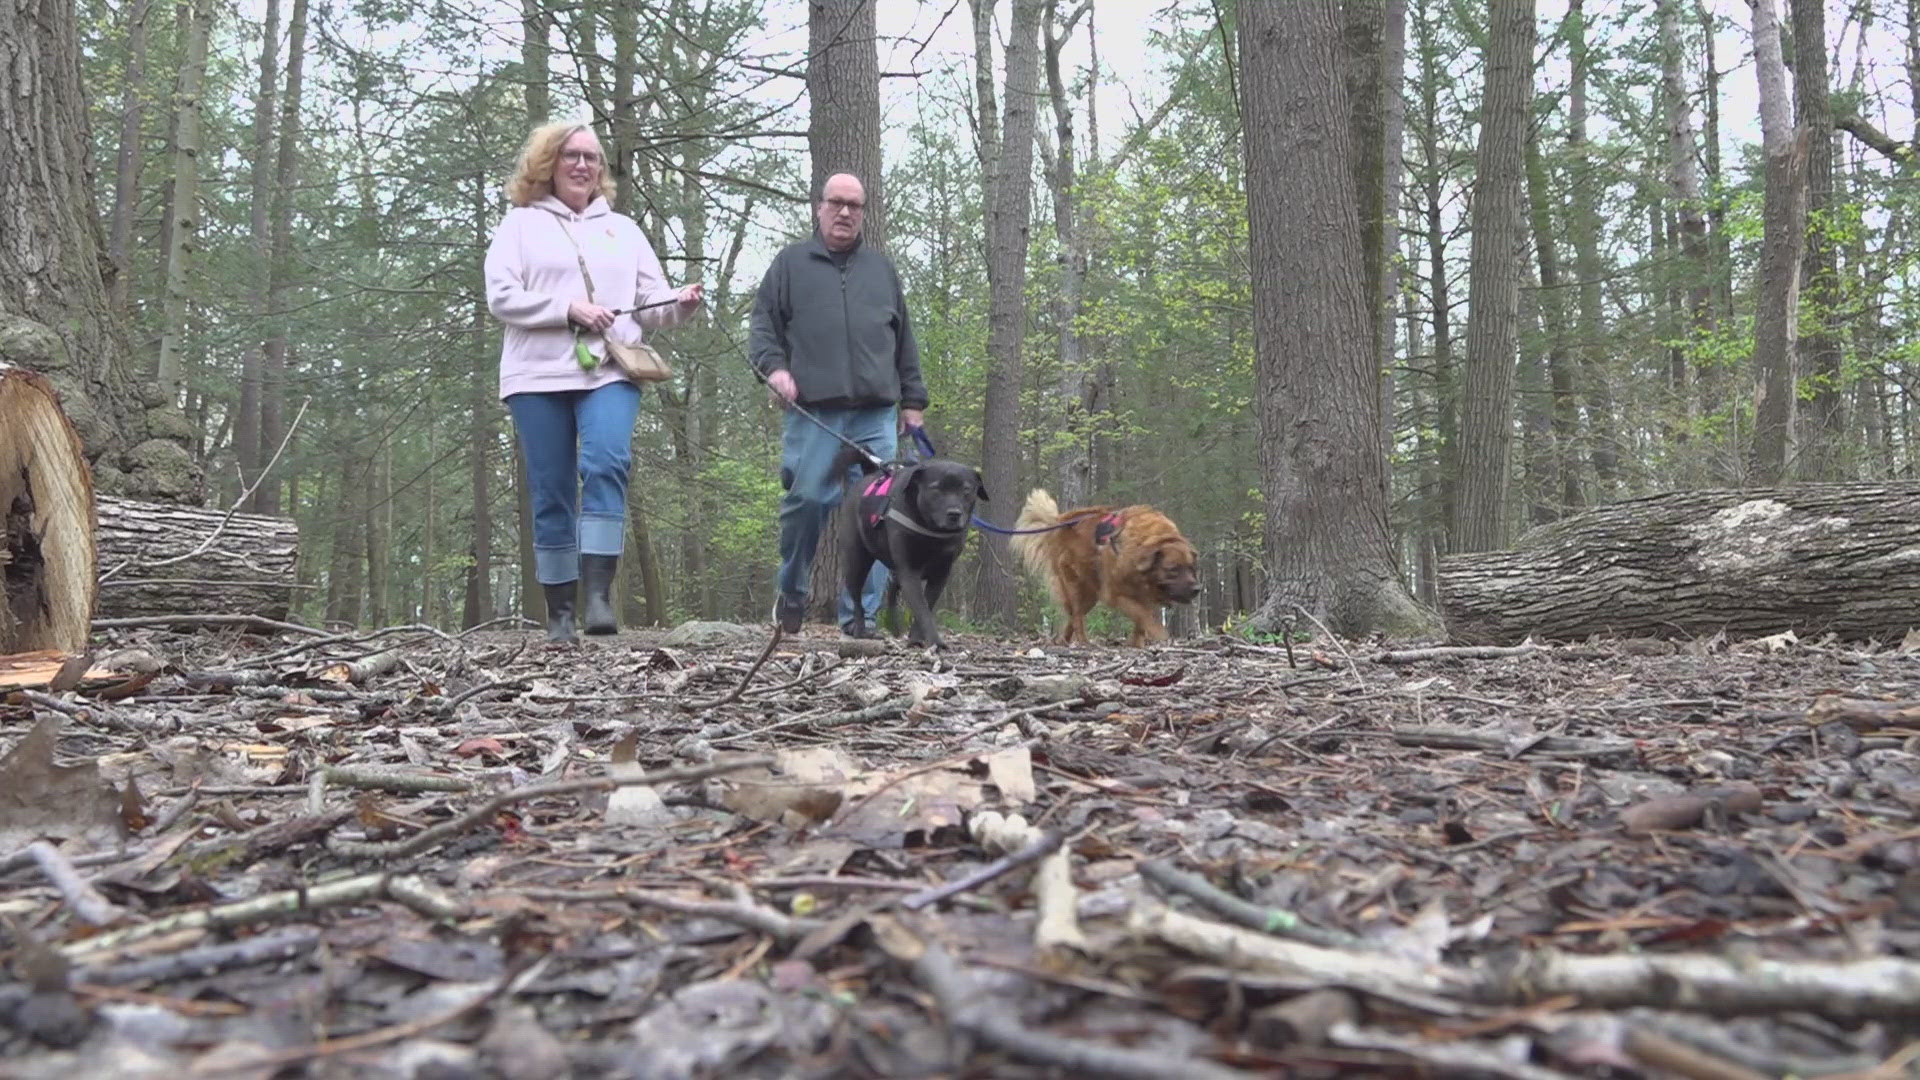 Marc Lesperance is suing the city for a second time over a rule requiring dogs be leashed in the woods from April 1 through July 31.